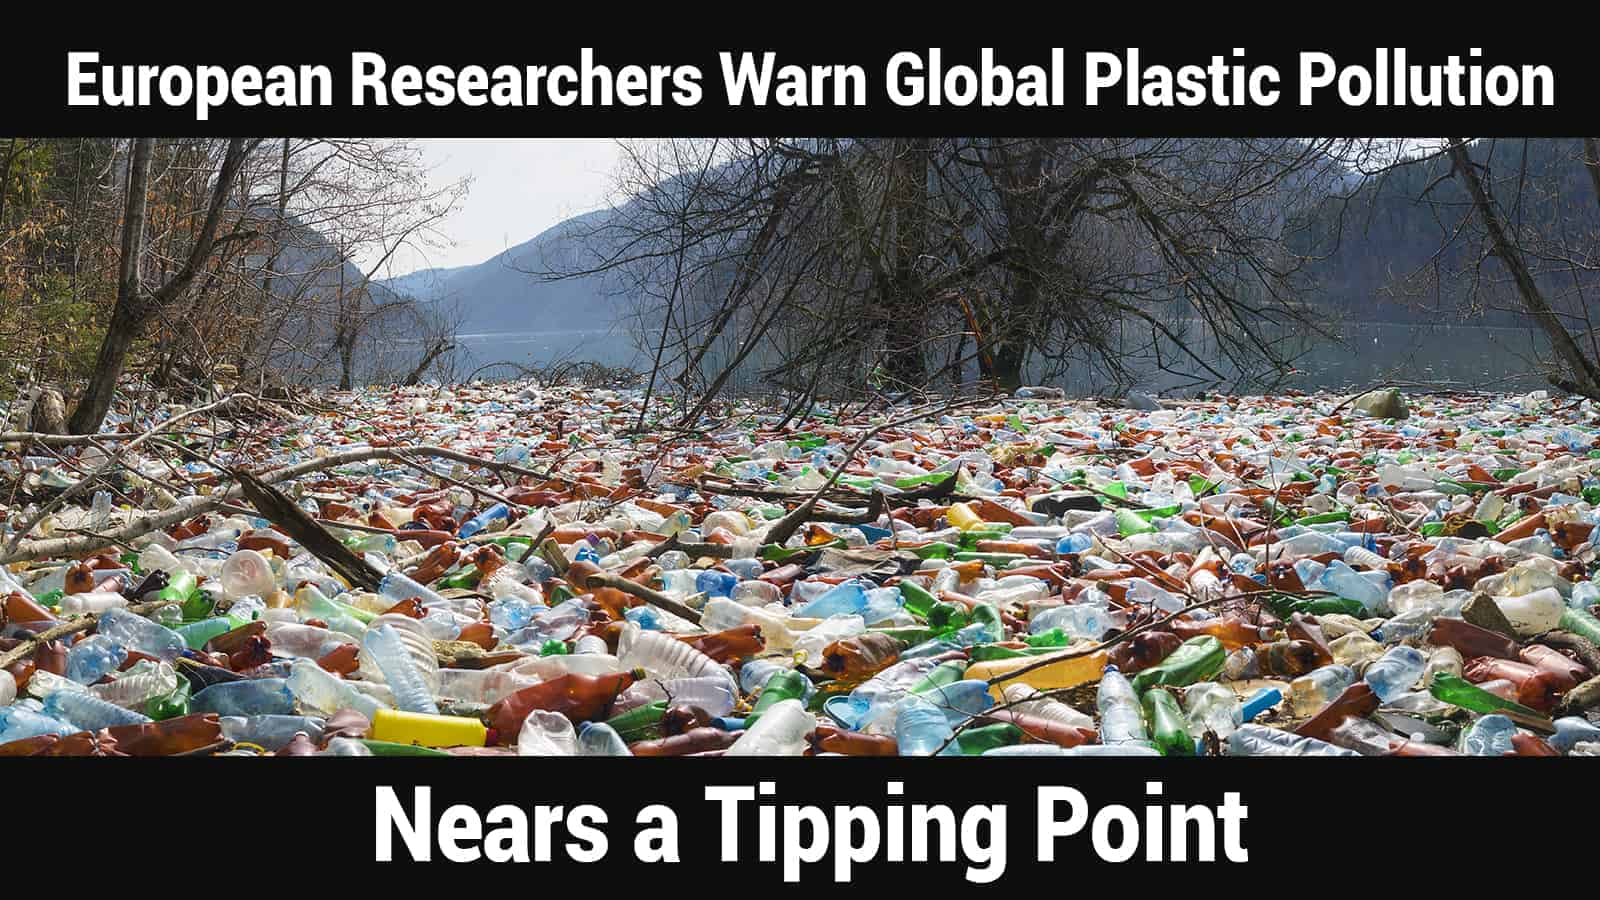 European Researchers Warn Global Plastic Pollution Nears a Tipping Point